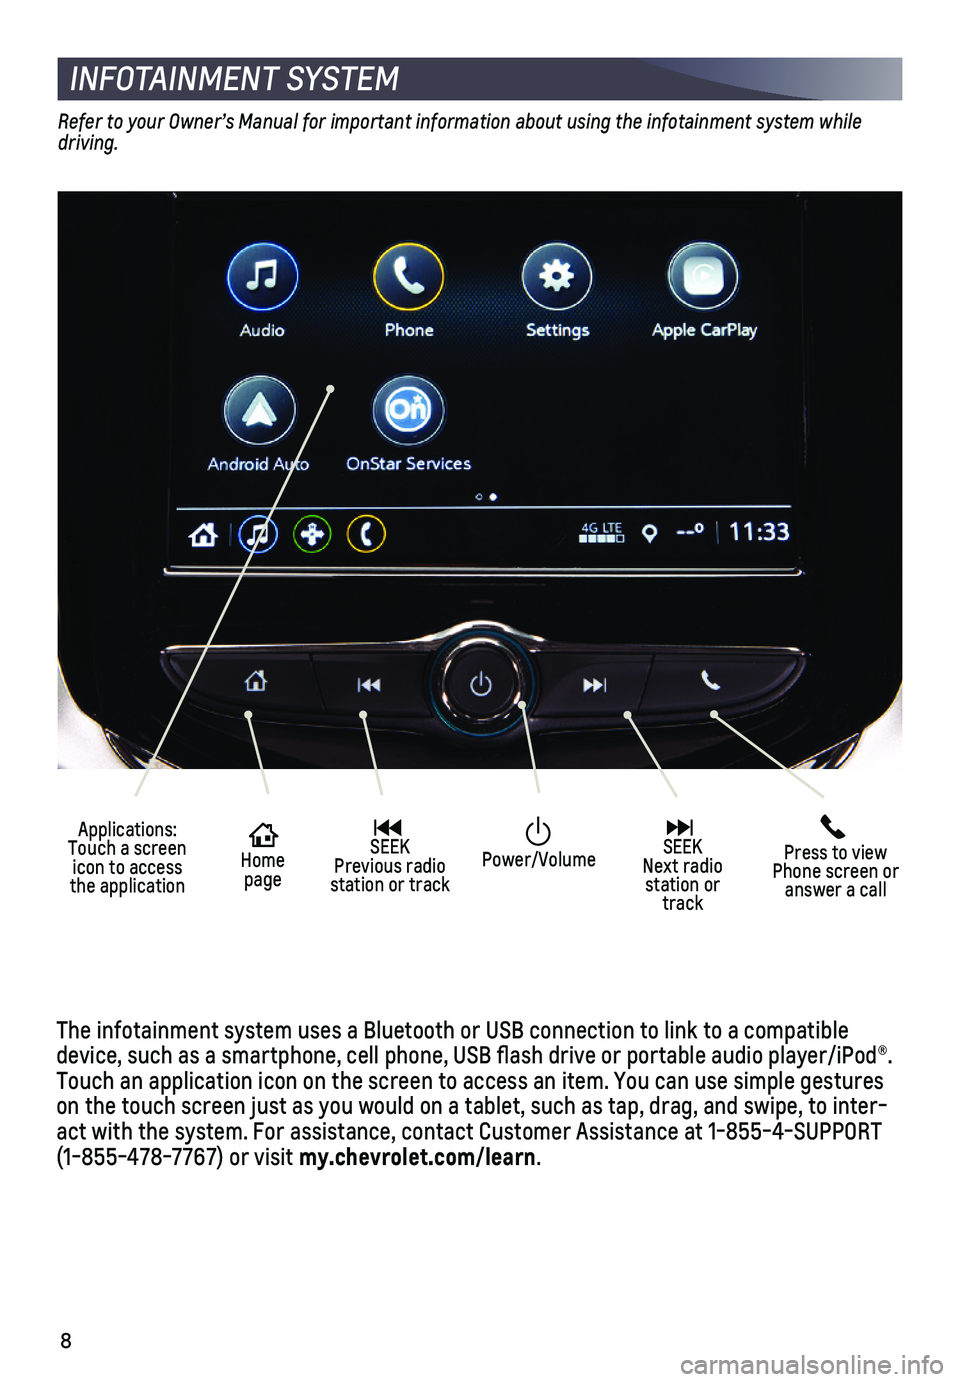 CHEVROLET SONIC 2019  Get To Know Guide 8
INFOTAINMENT SYSTEM
Refer to your Owner’s Manual for important information about using the infotainment system while driving.
The infotainment system uses a Bluetooth or USB connection to link to 